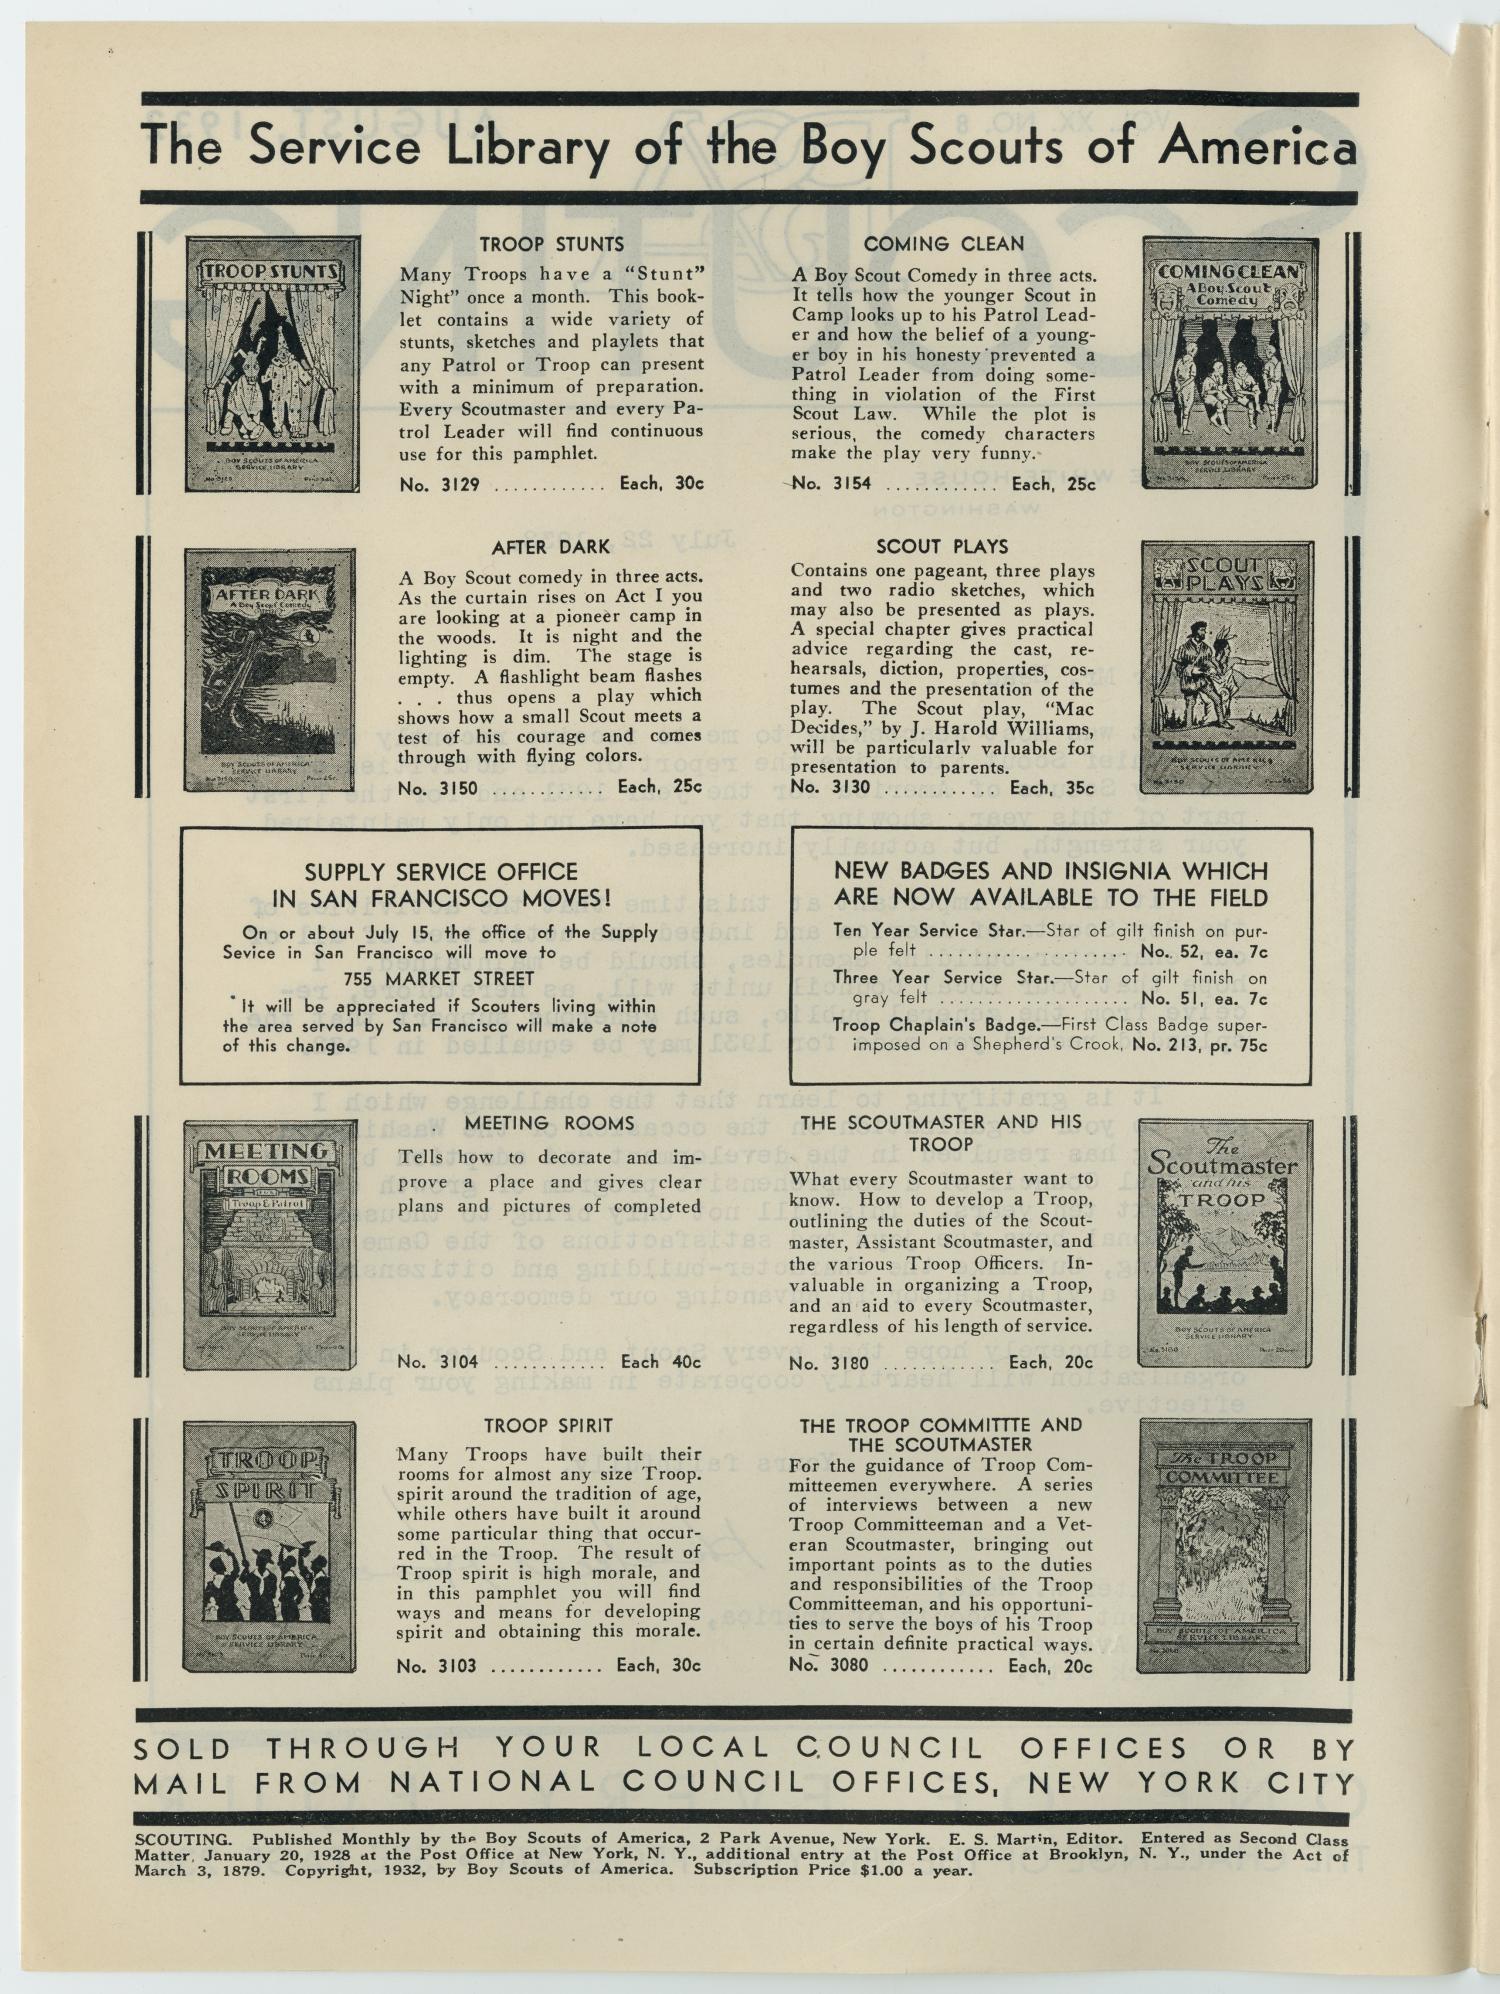 Scouting, Volume 20, Number 8, August 1932
                                                
                                                    222
                                                